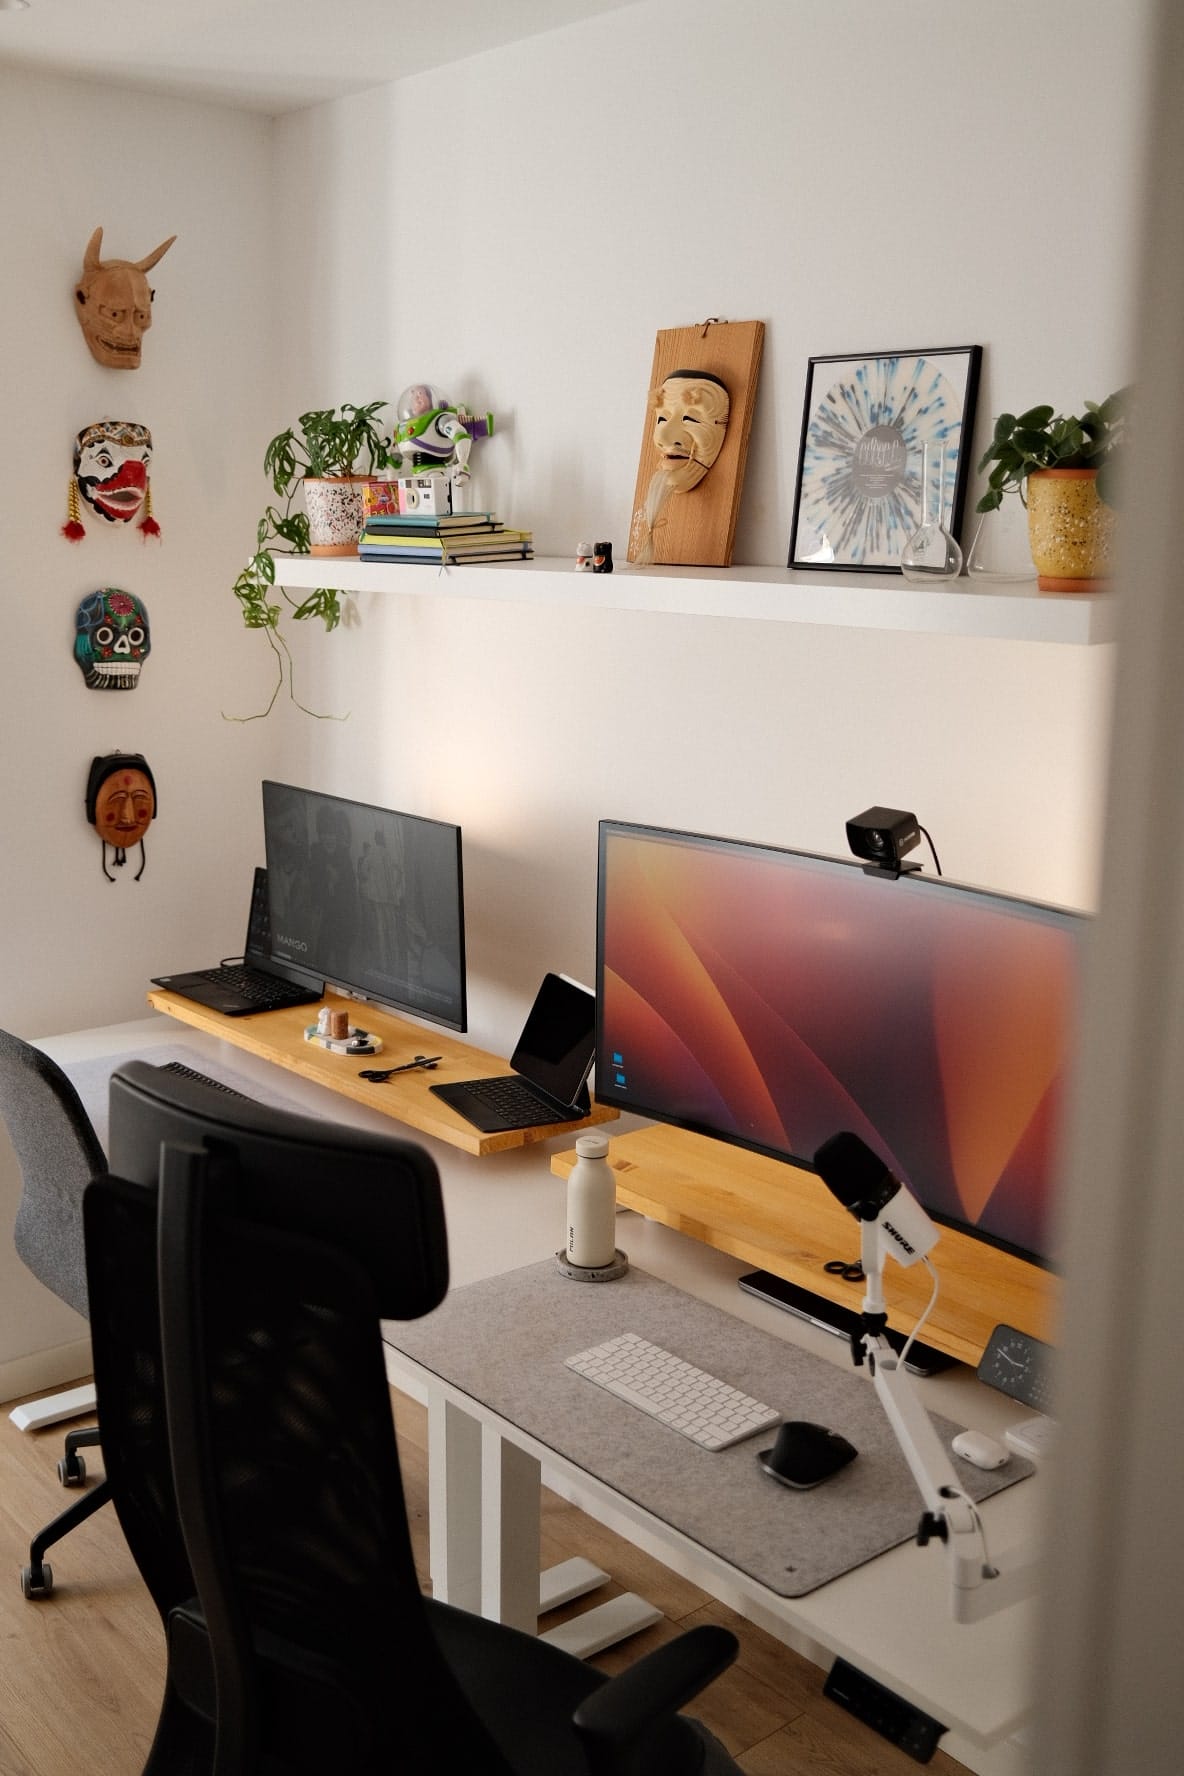 A cosy shared home office setup with two ergonomic chairs, two monitors, a laptop, microphone, and decorative masks and plants on the shelf